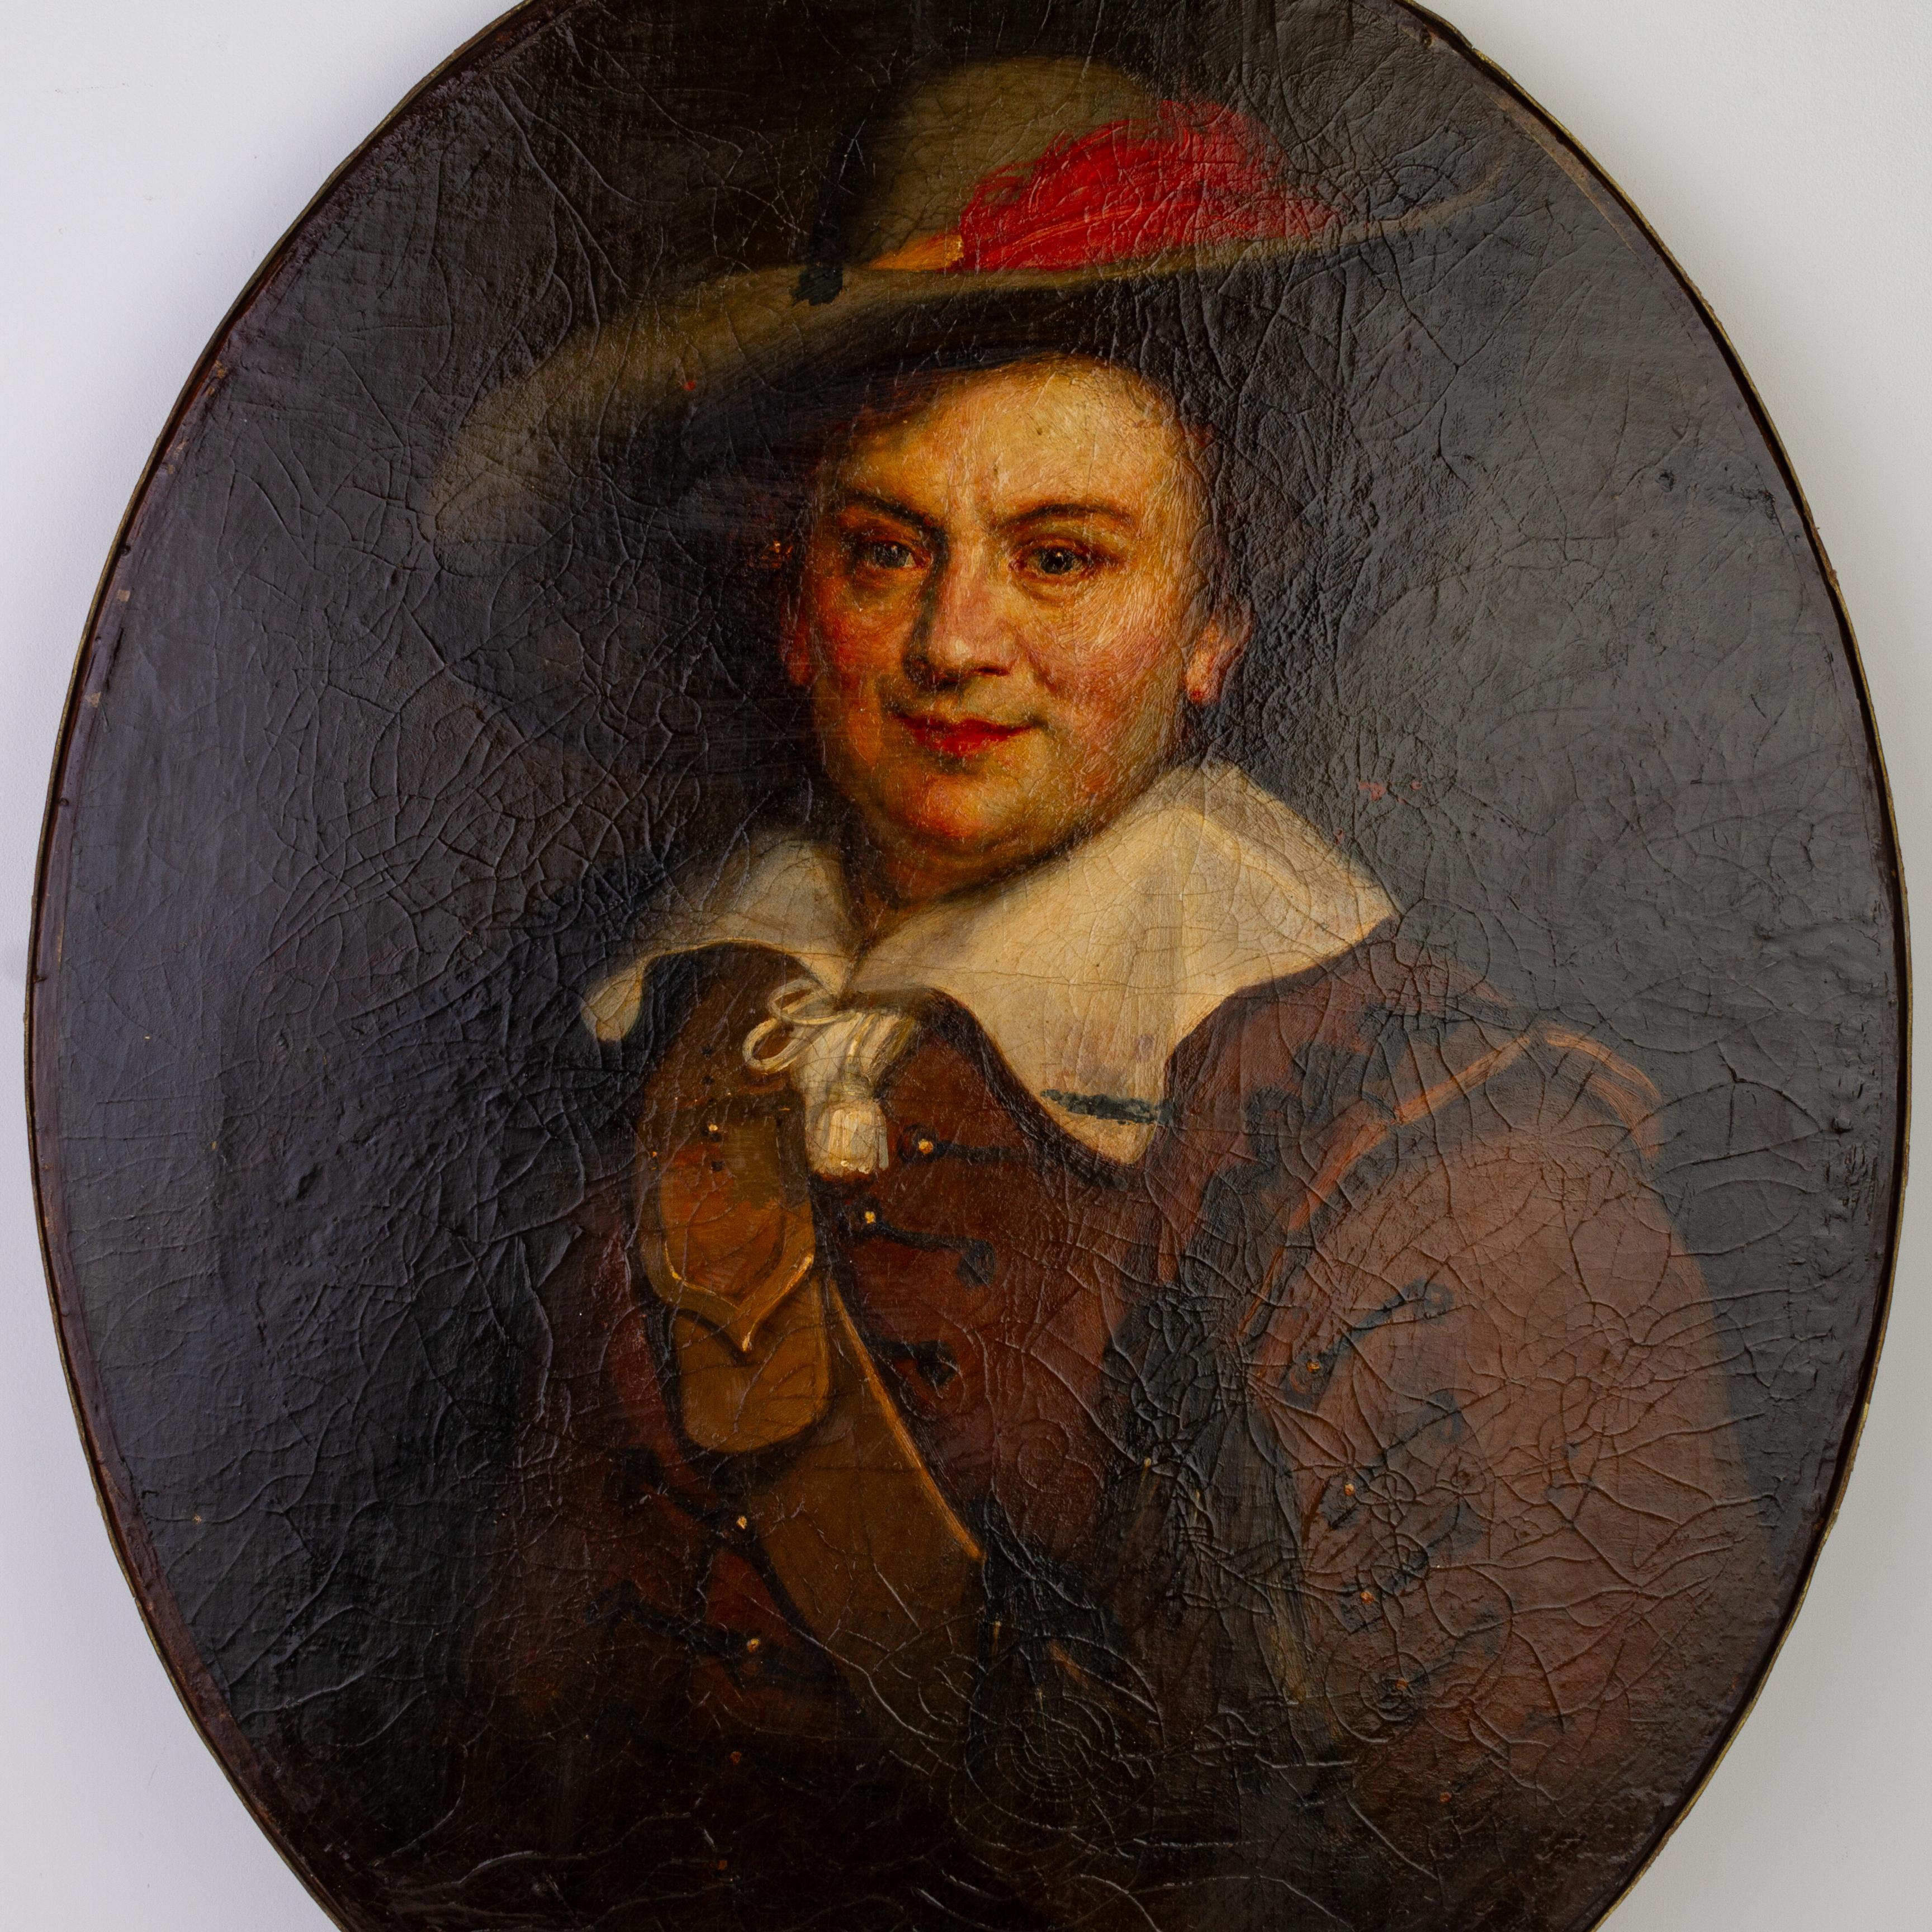 In good condition
From a private collection
Free international shipping
18th Century Portrait of a Musketeer Old Master Oil Painting
